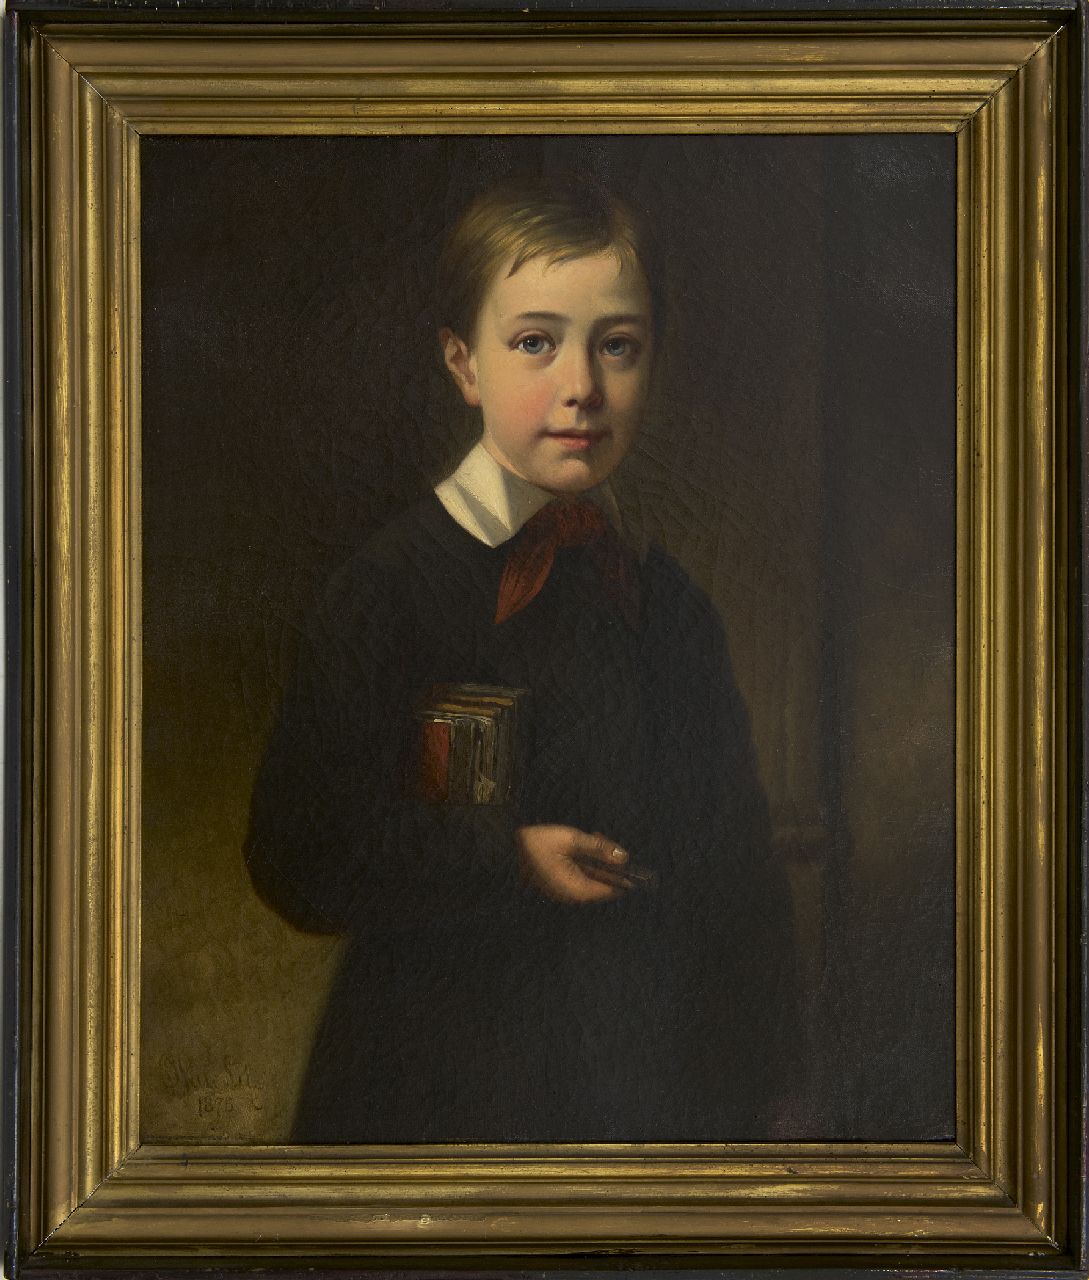 Lil J. van | Joseph van Lil | Paintings offered for sale | Portrait of the painter's son Georges, oil on canvas 63.3 x 51.5 cm, signed l.l. and dated 1875